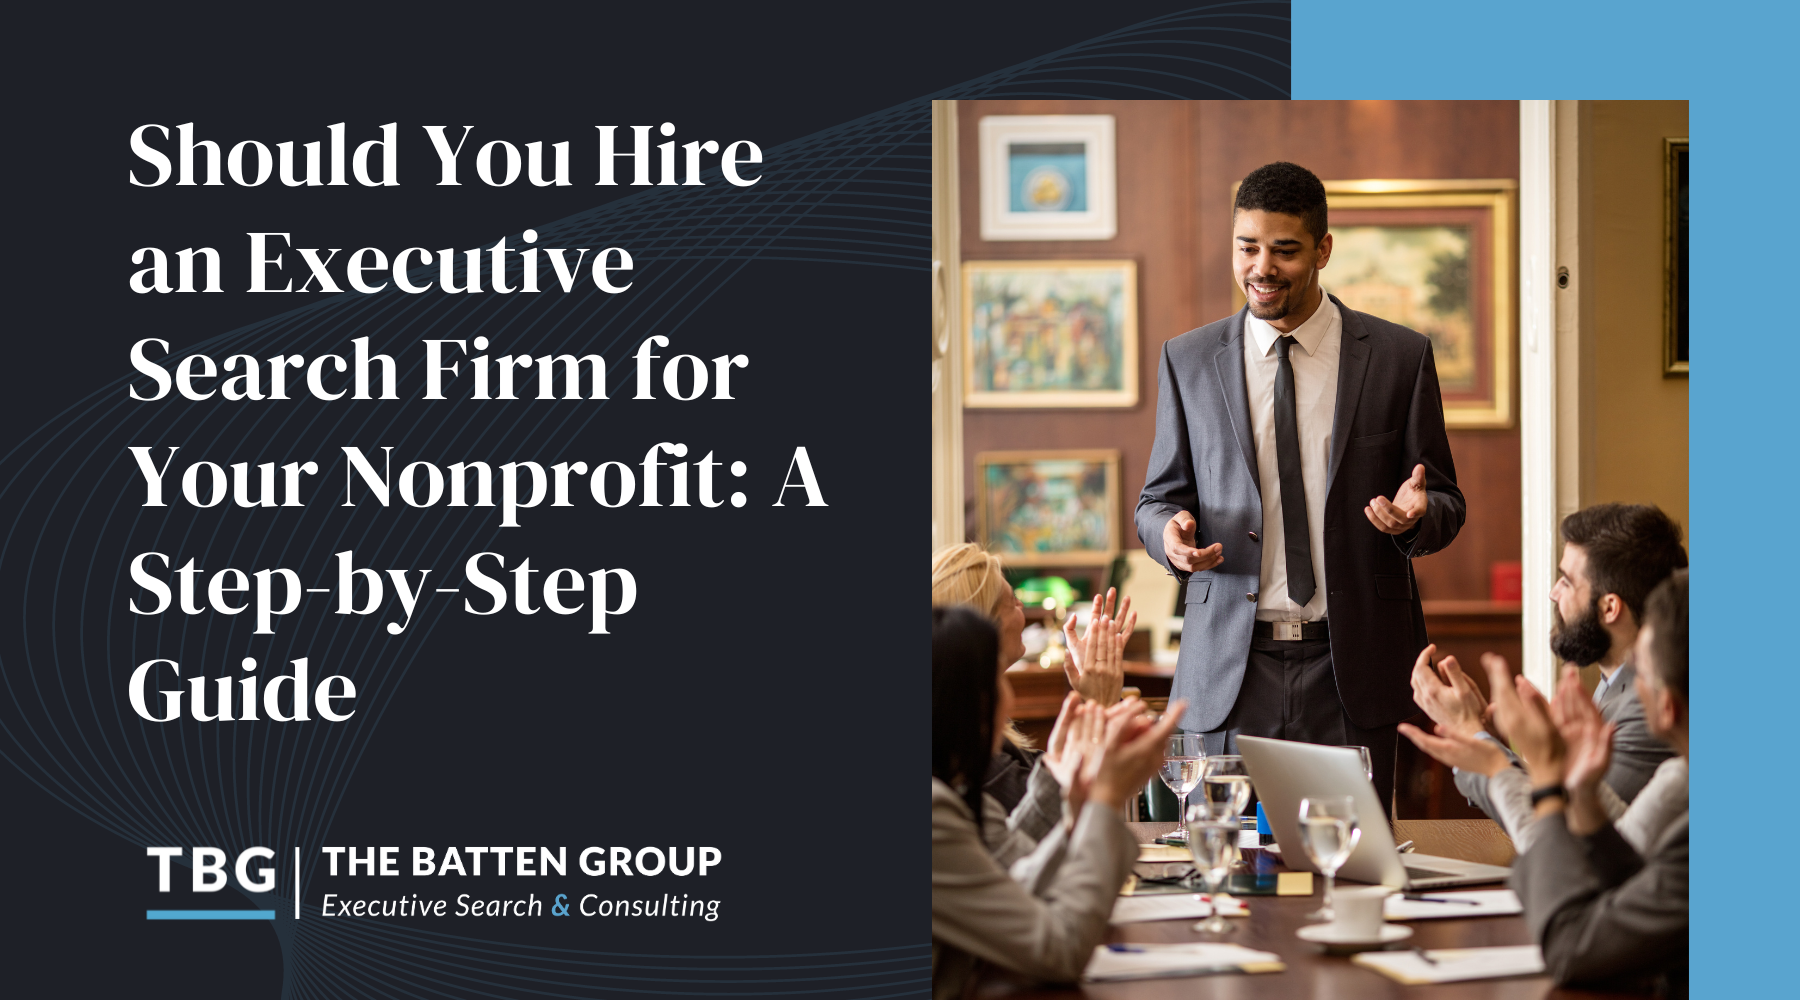 Should You Hire an Executive Search Firm for Your Nonprofit: A Step-by-Step Guide